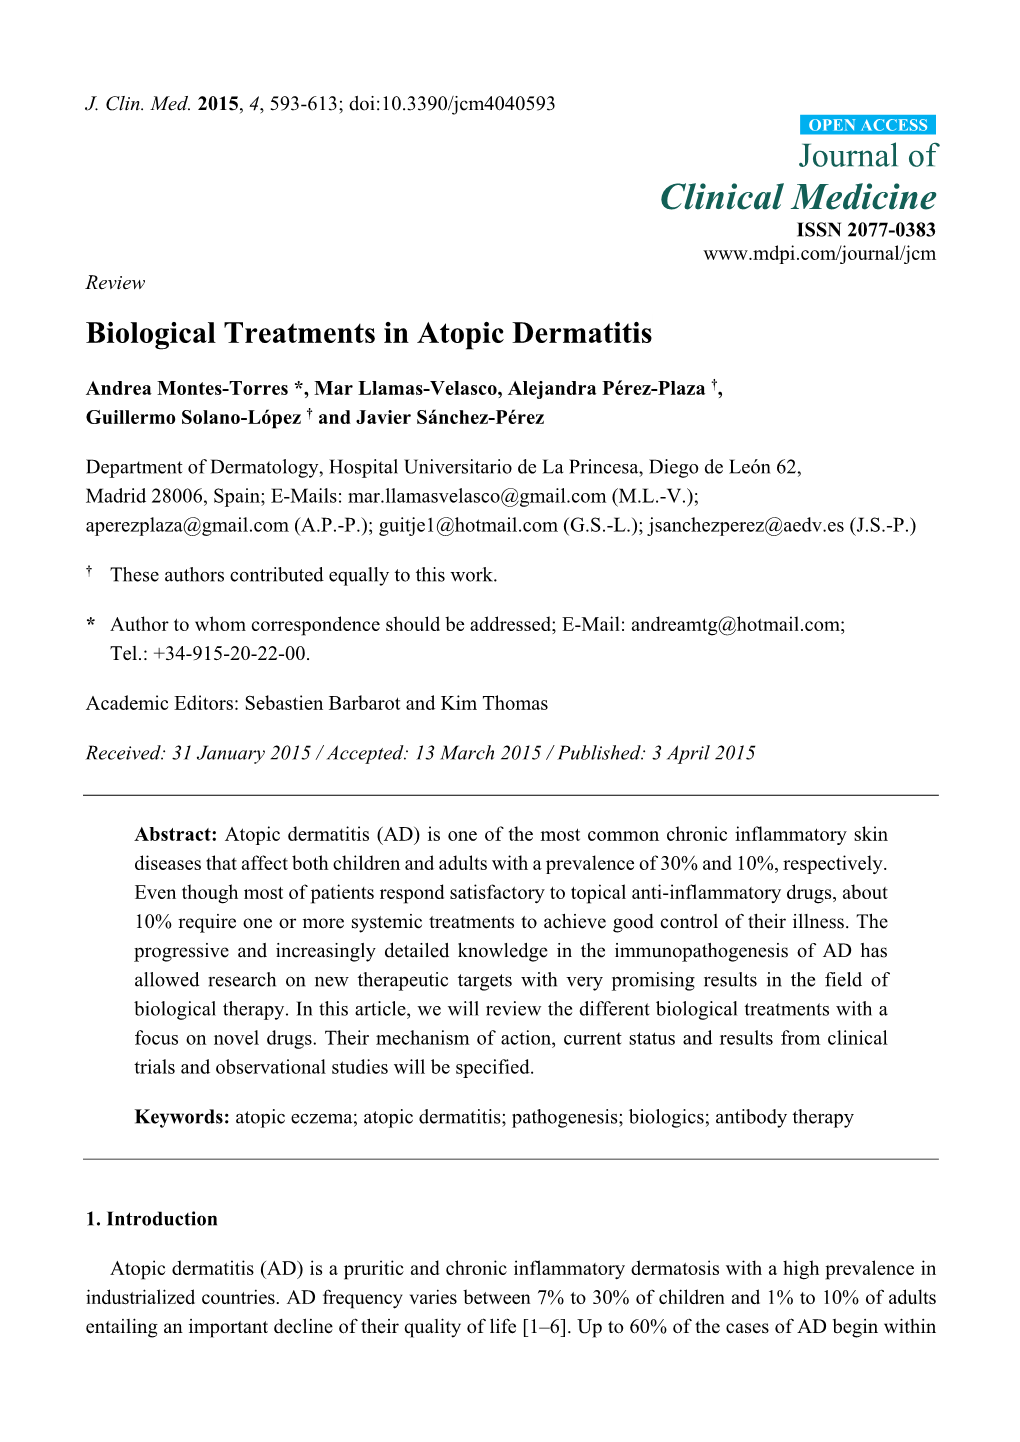 Biological Treatments in Atopic Dermatitis